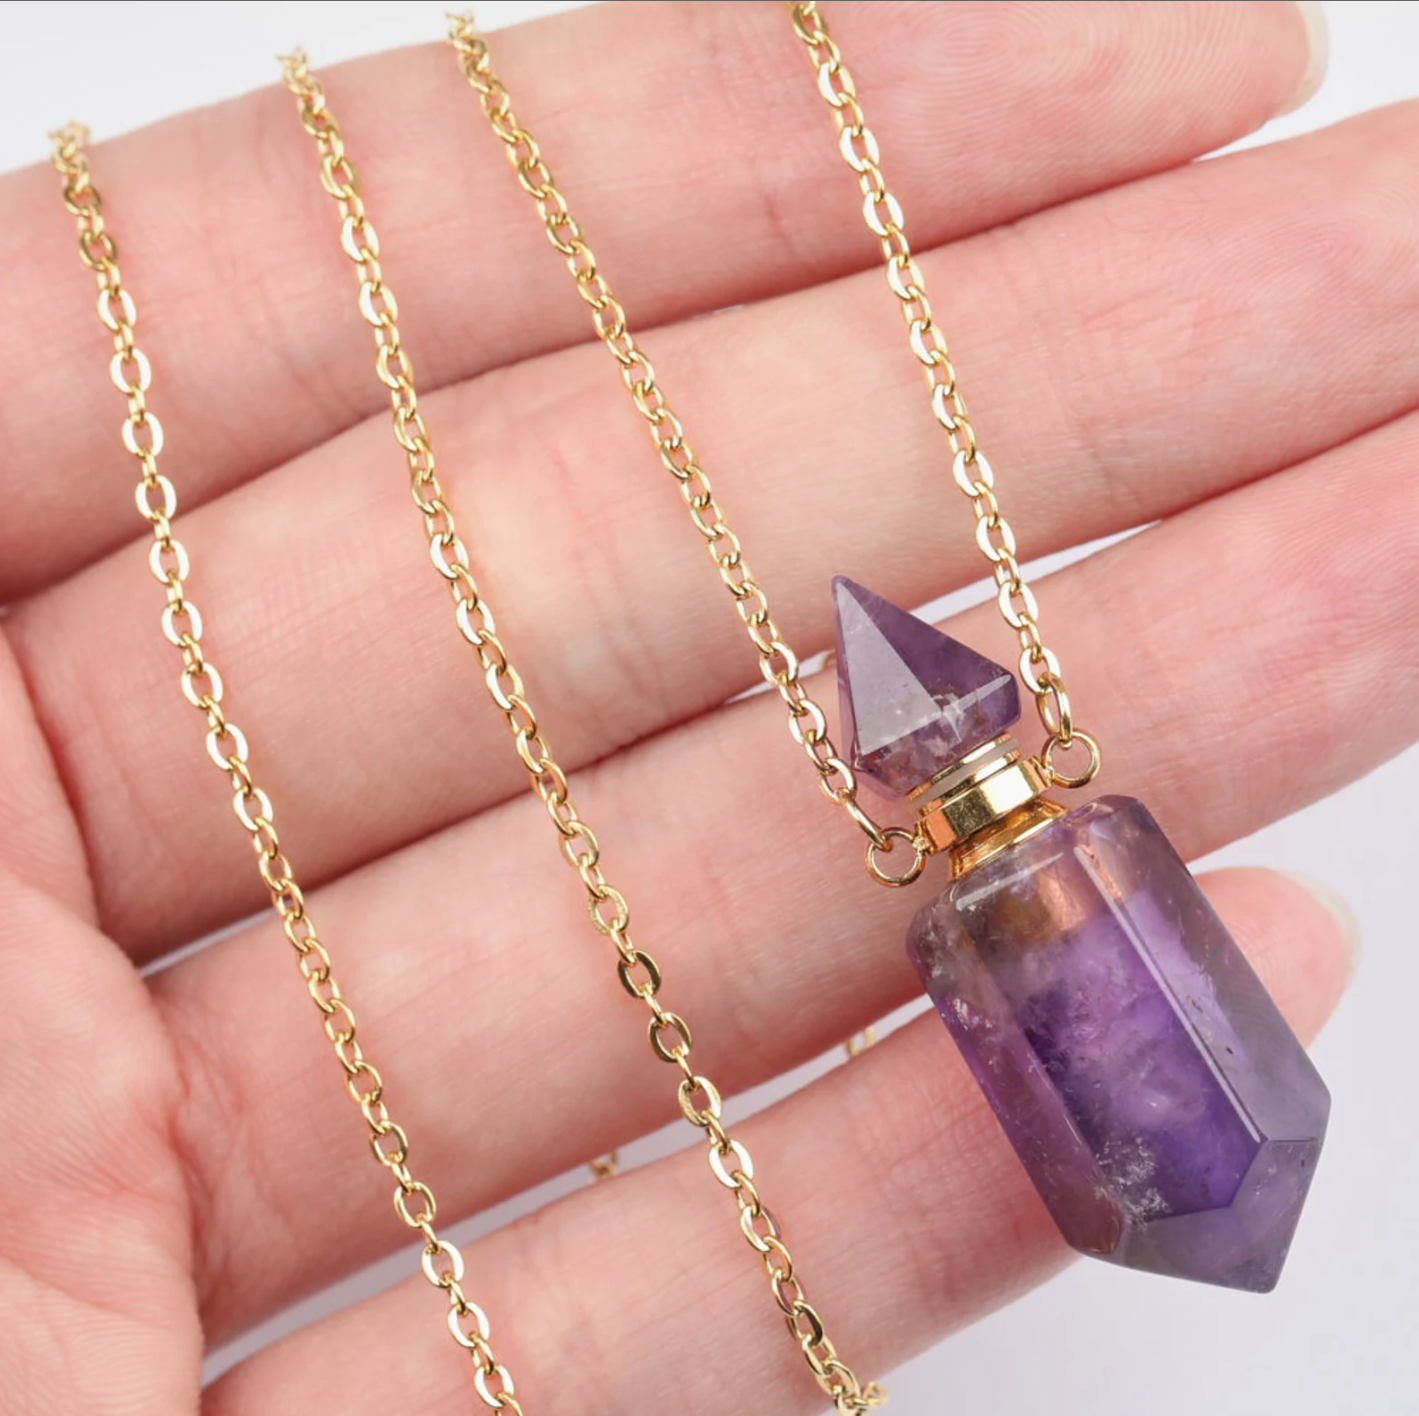 Natural Crystal Perfume Bottle Spiked Hexagon Necklace